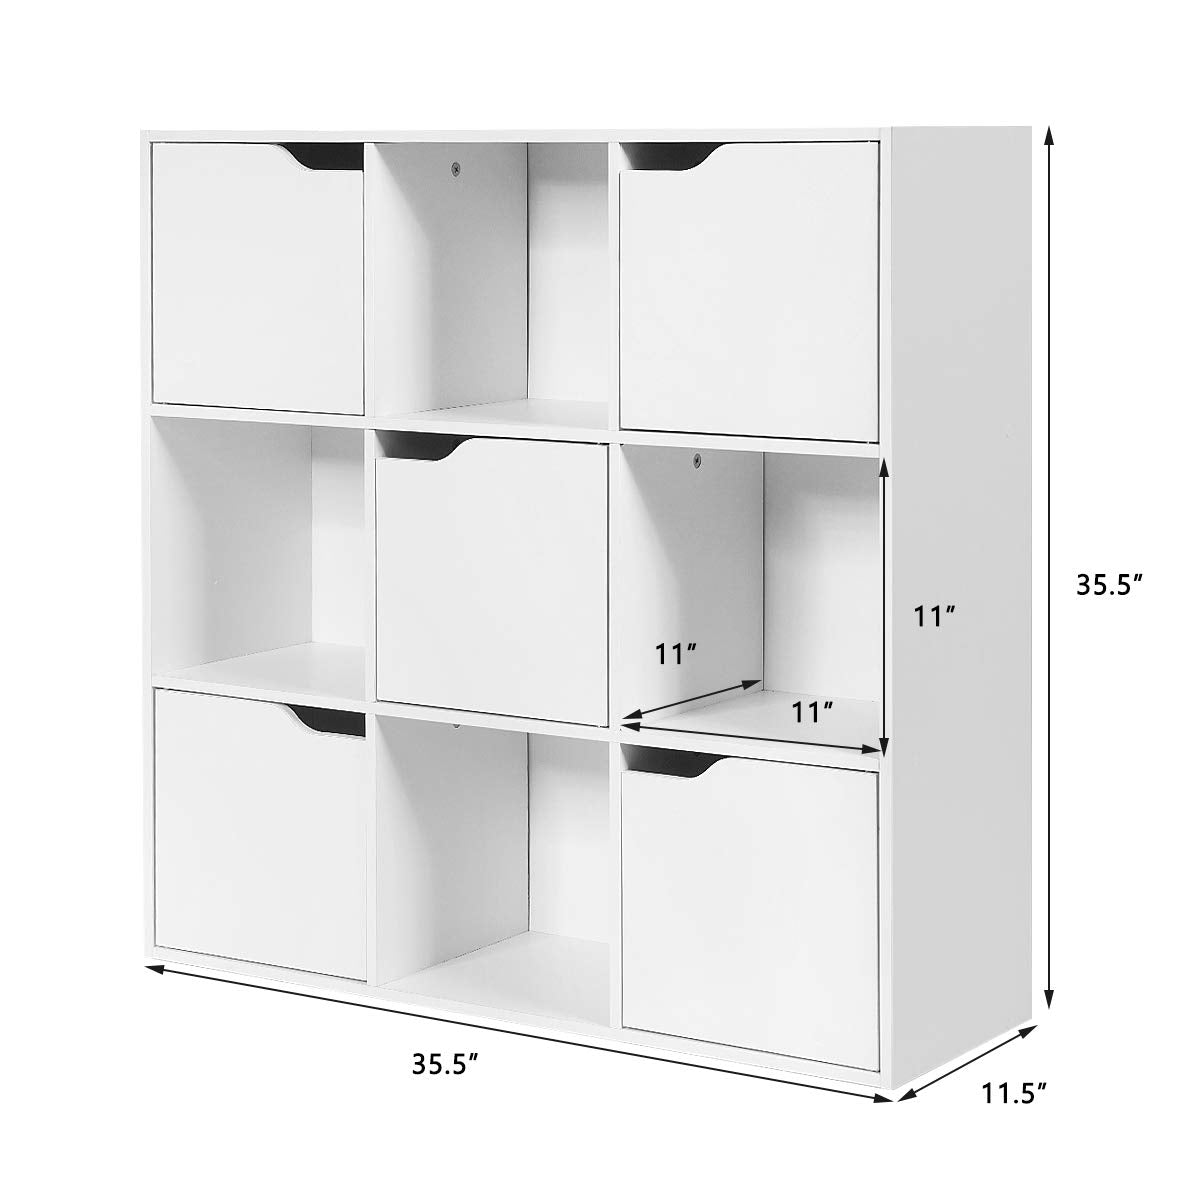 Giantex 9-Cube Storage Organizer, Storage Cabinet with 4 Open Cubes and 5 Cabinets